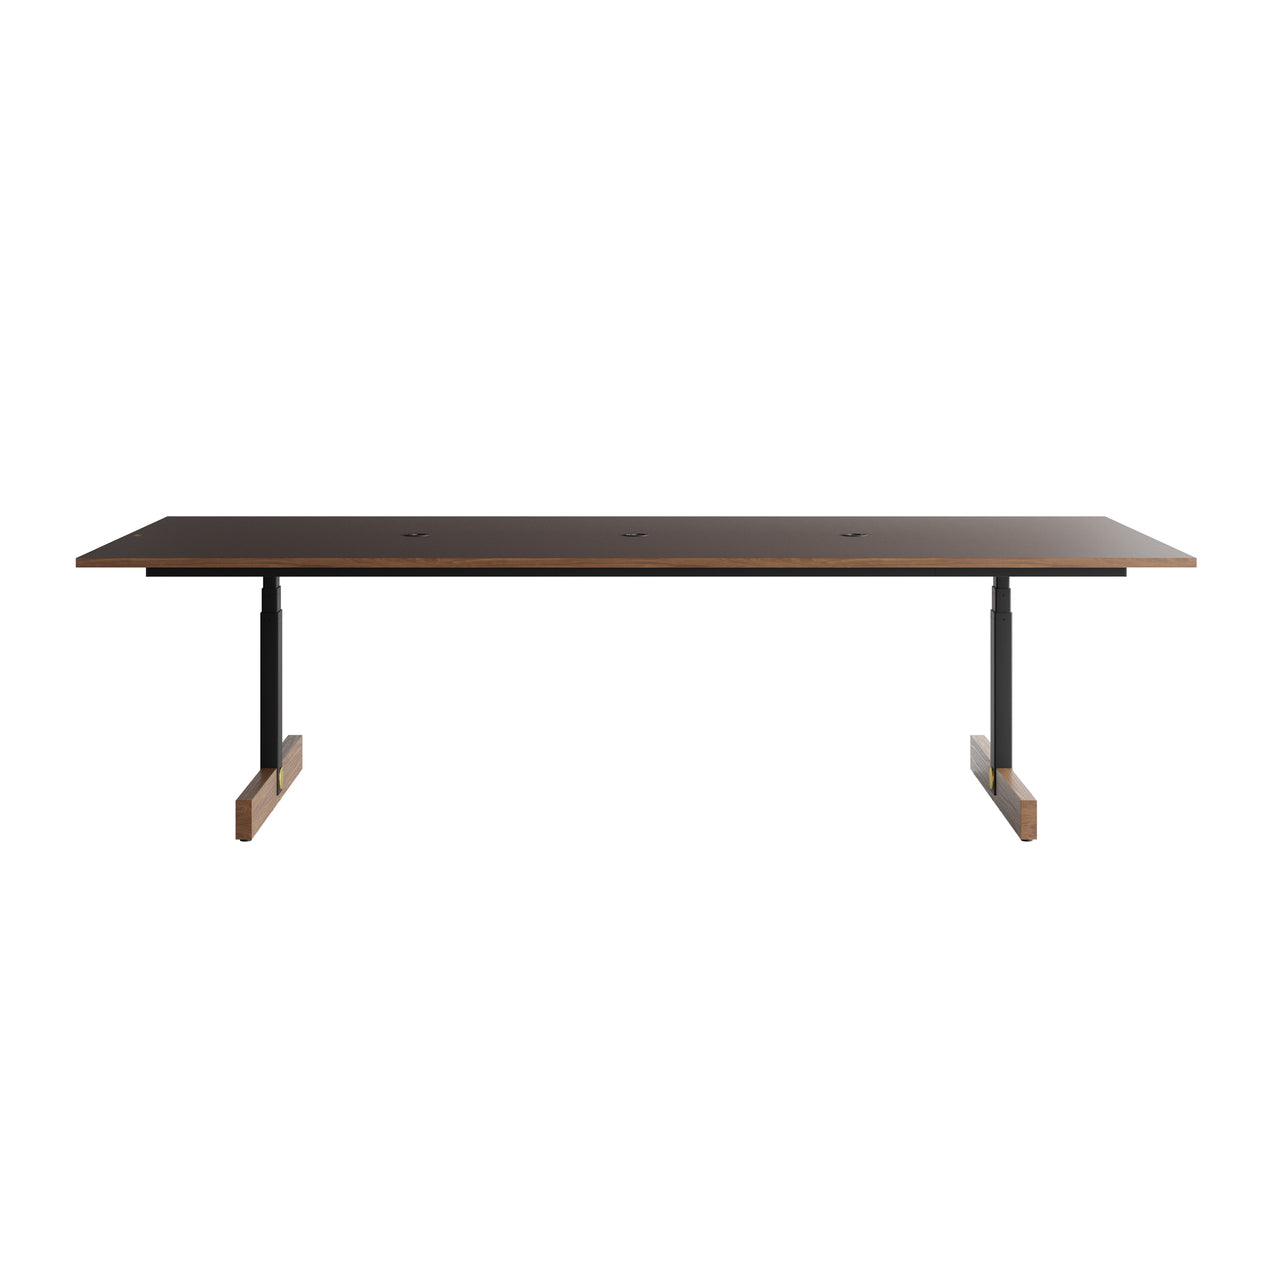 Coinz Height Adjustable Conference Table: Medium - 55.1